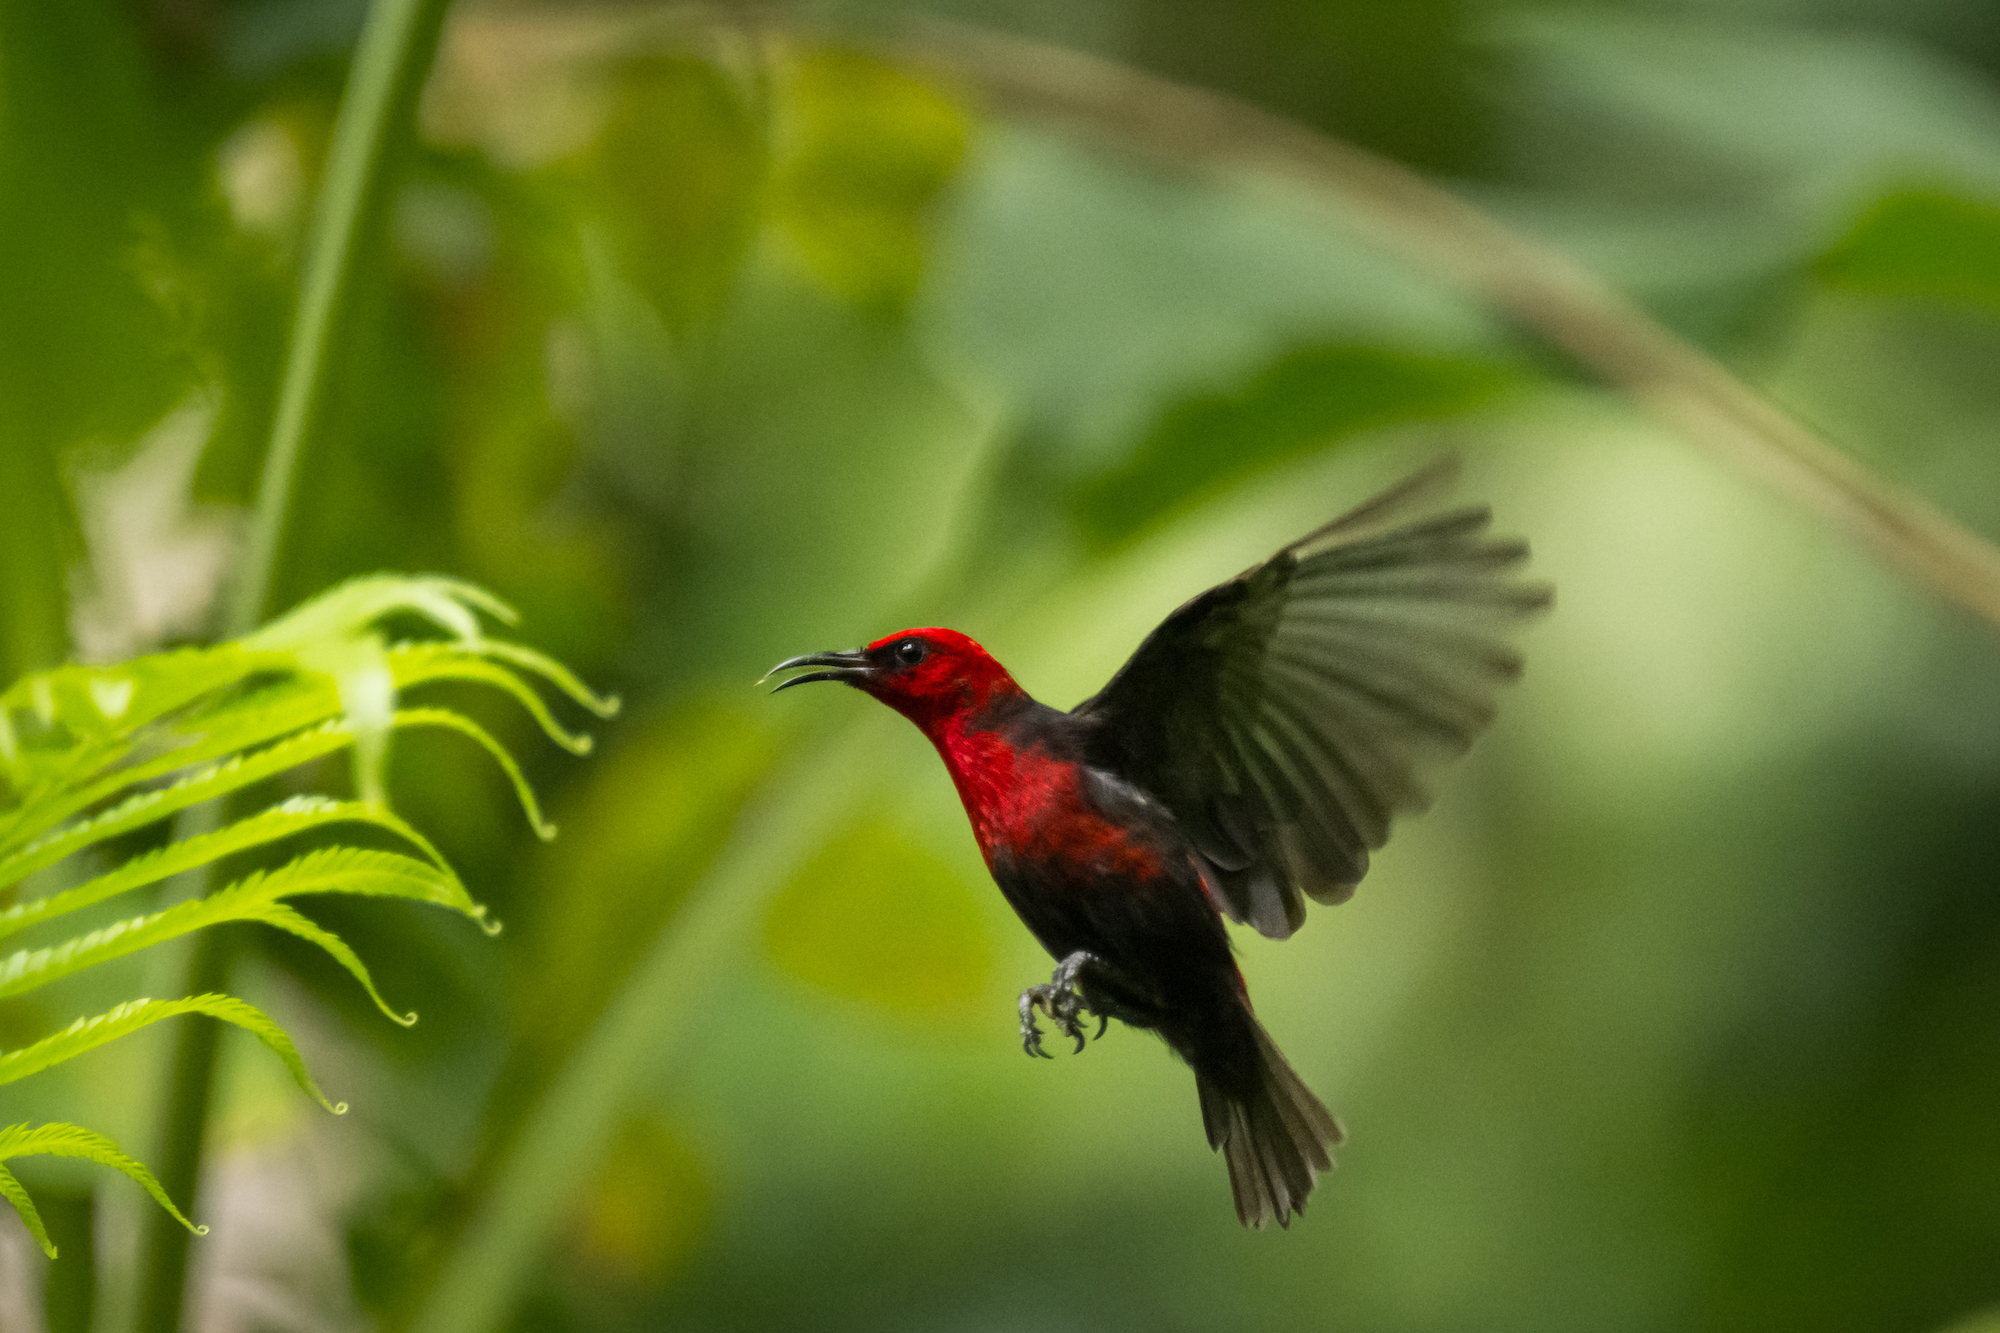 Red and black bird hovers near lush green plants